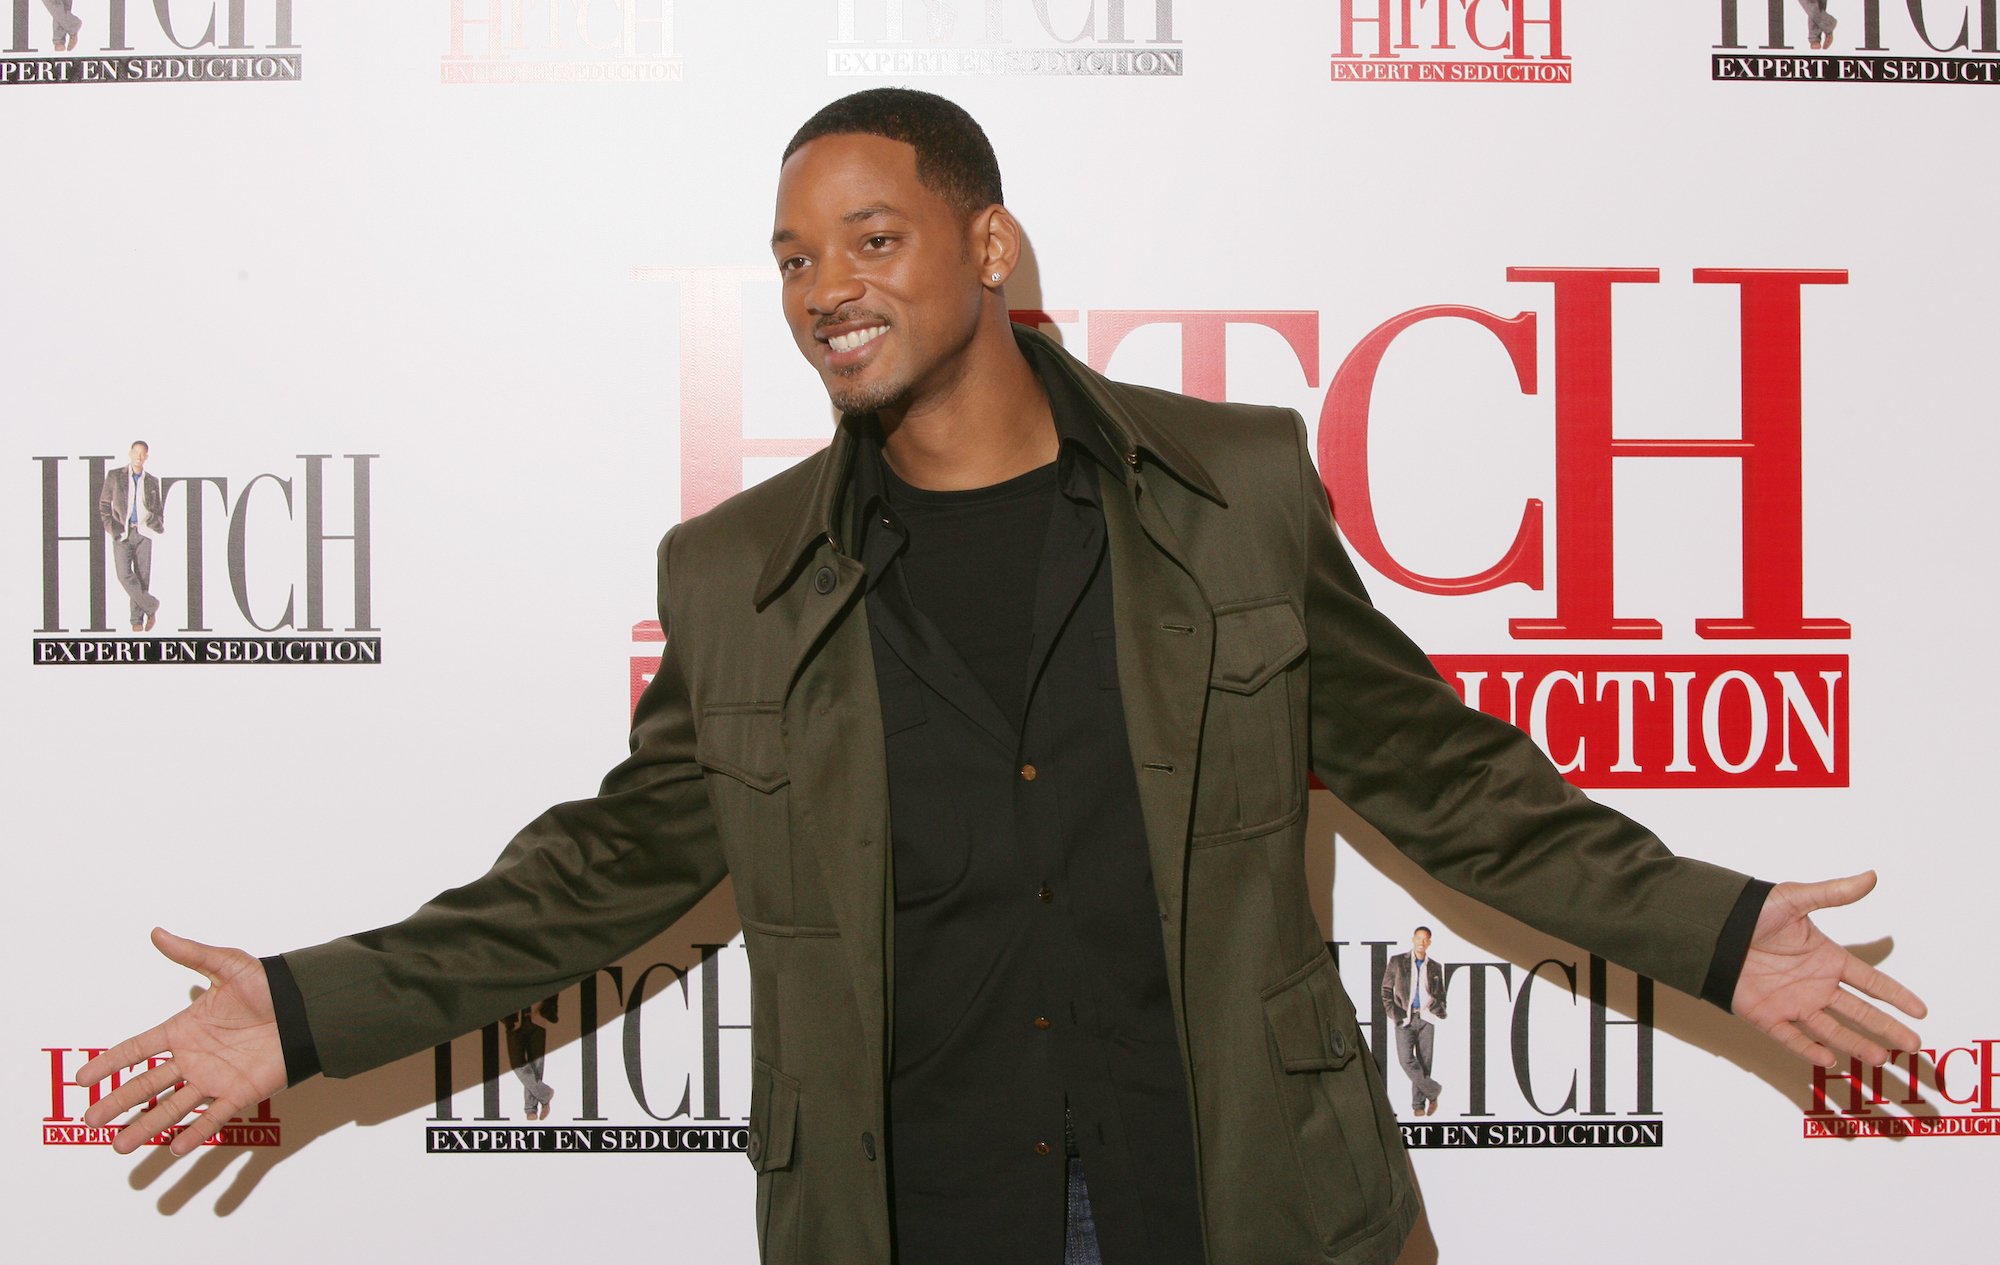 Will Smith opens his arms wide on the 'Hitch' red carpet